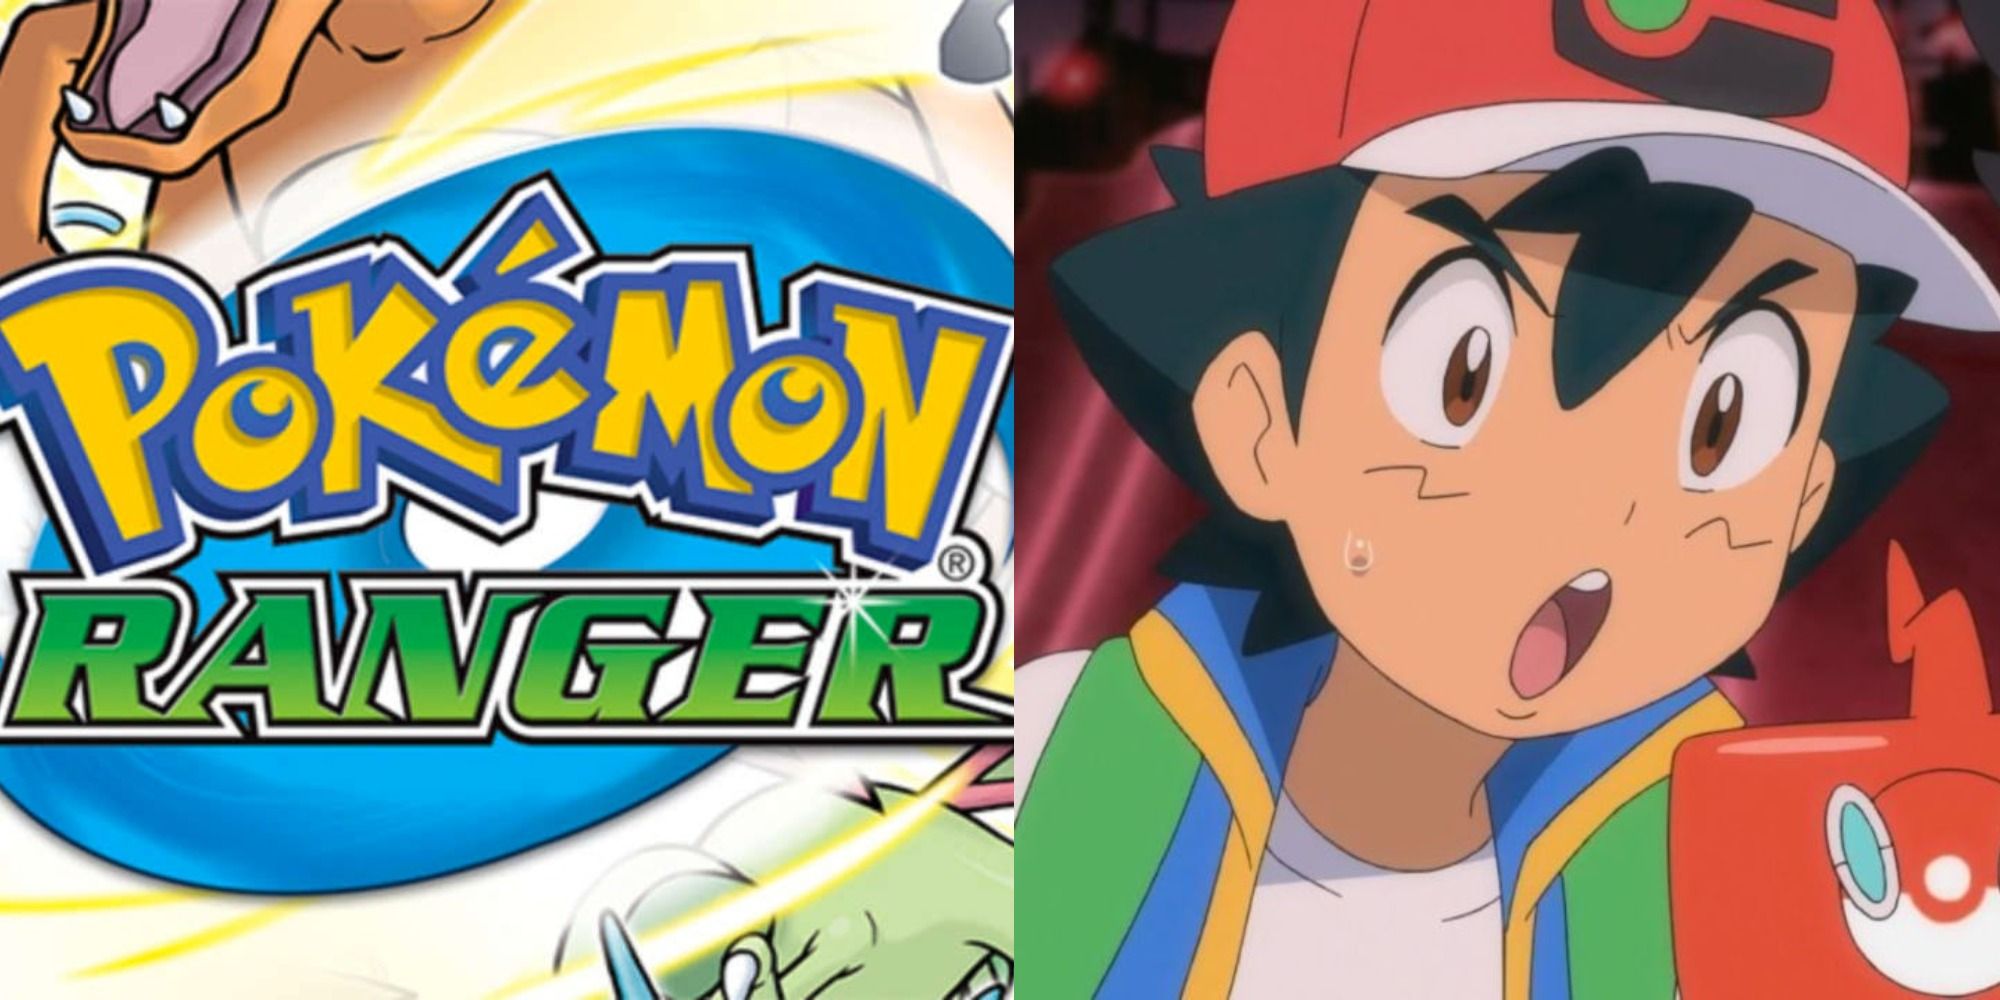 Two images side by side of the Pokemon Ranger logo and Ash looking surprised